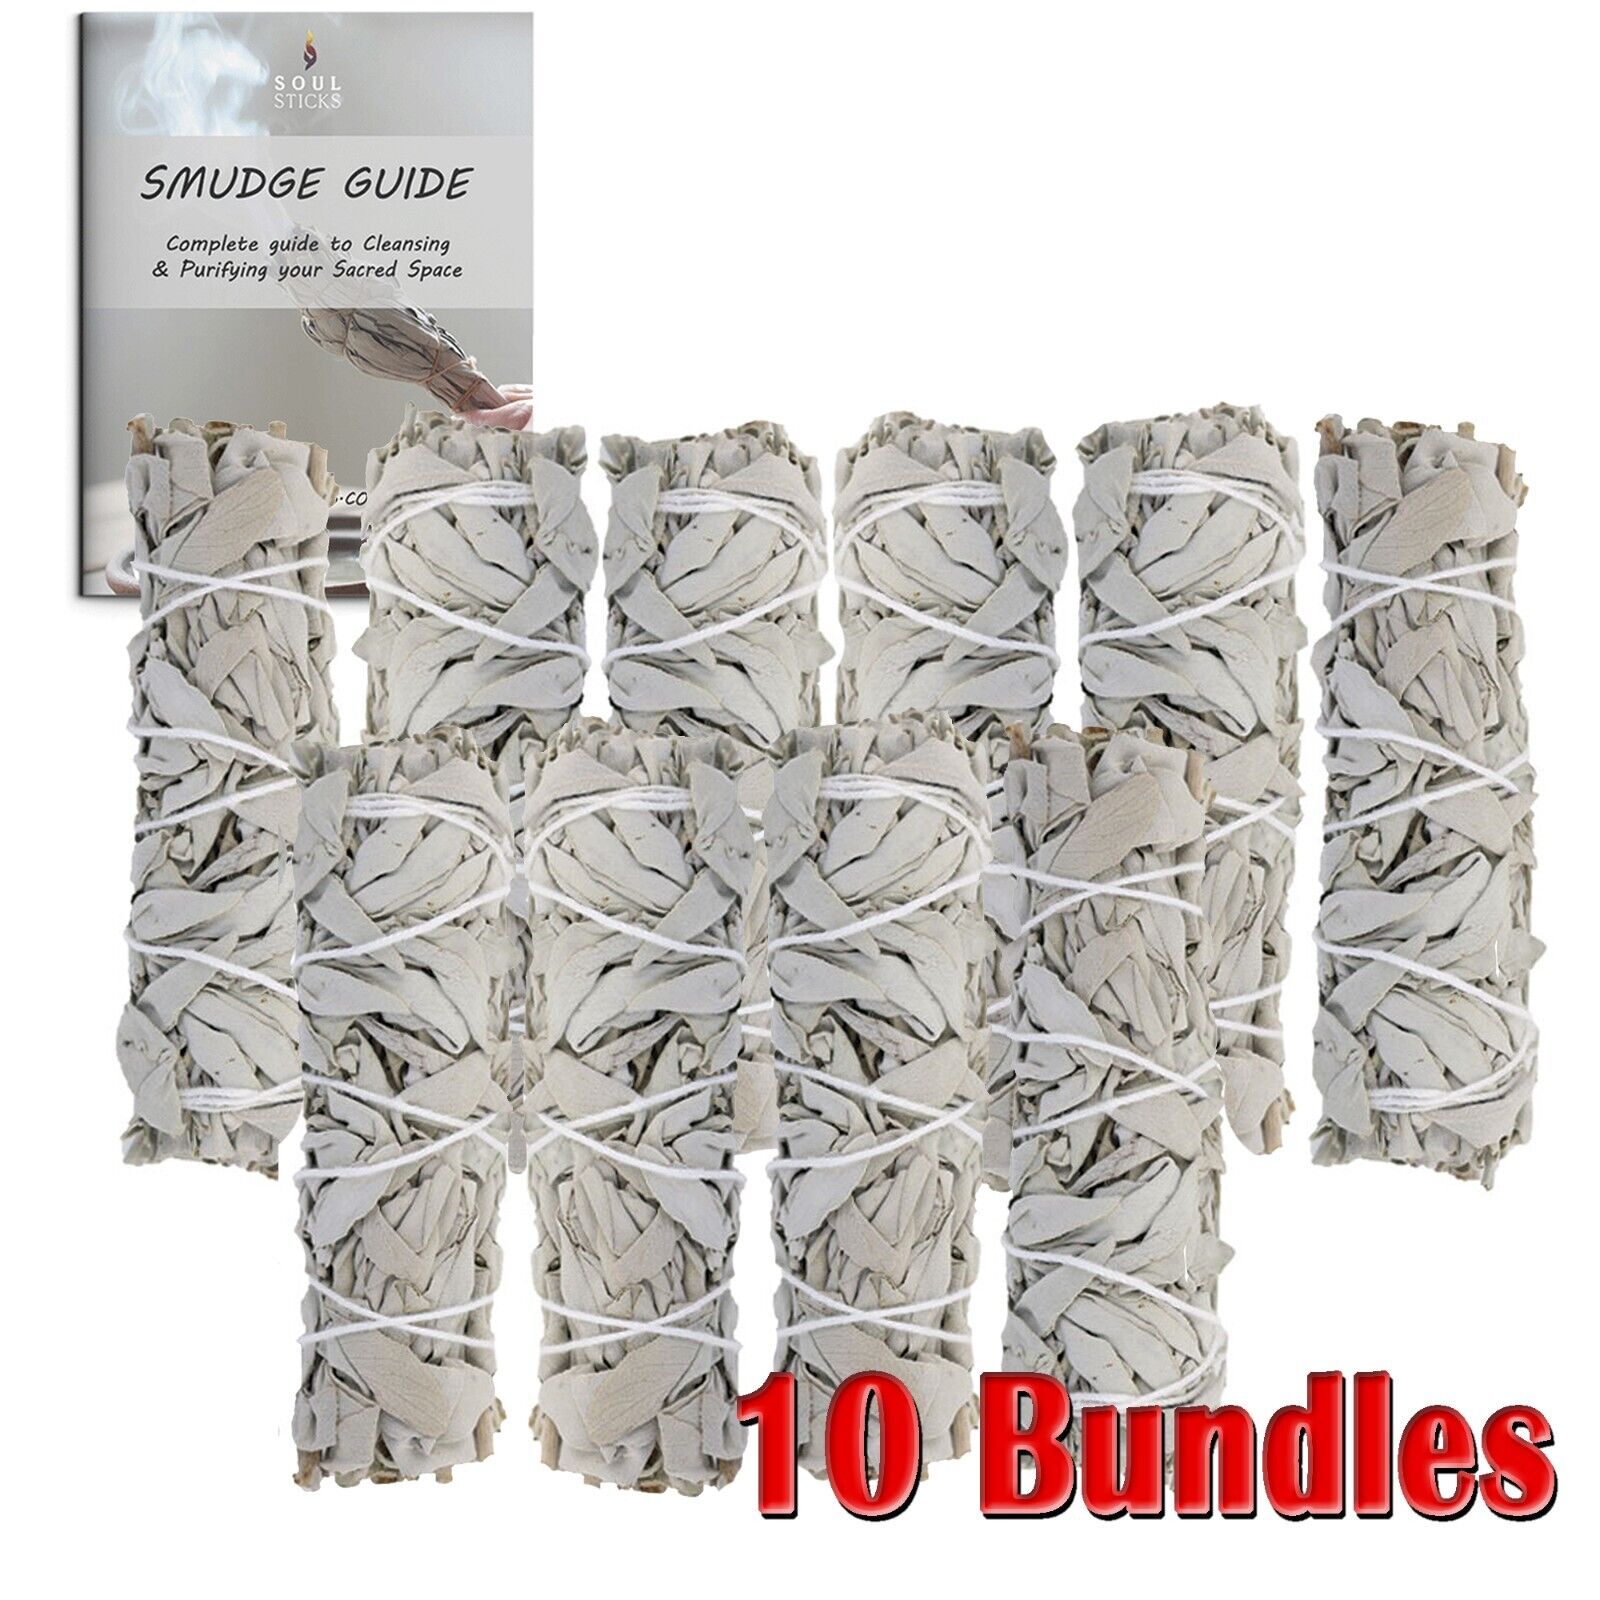 10 Pack 4 inch White Sage Smudge Sticks and Smudge Guide for Cleansing Spaces